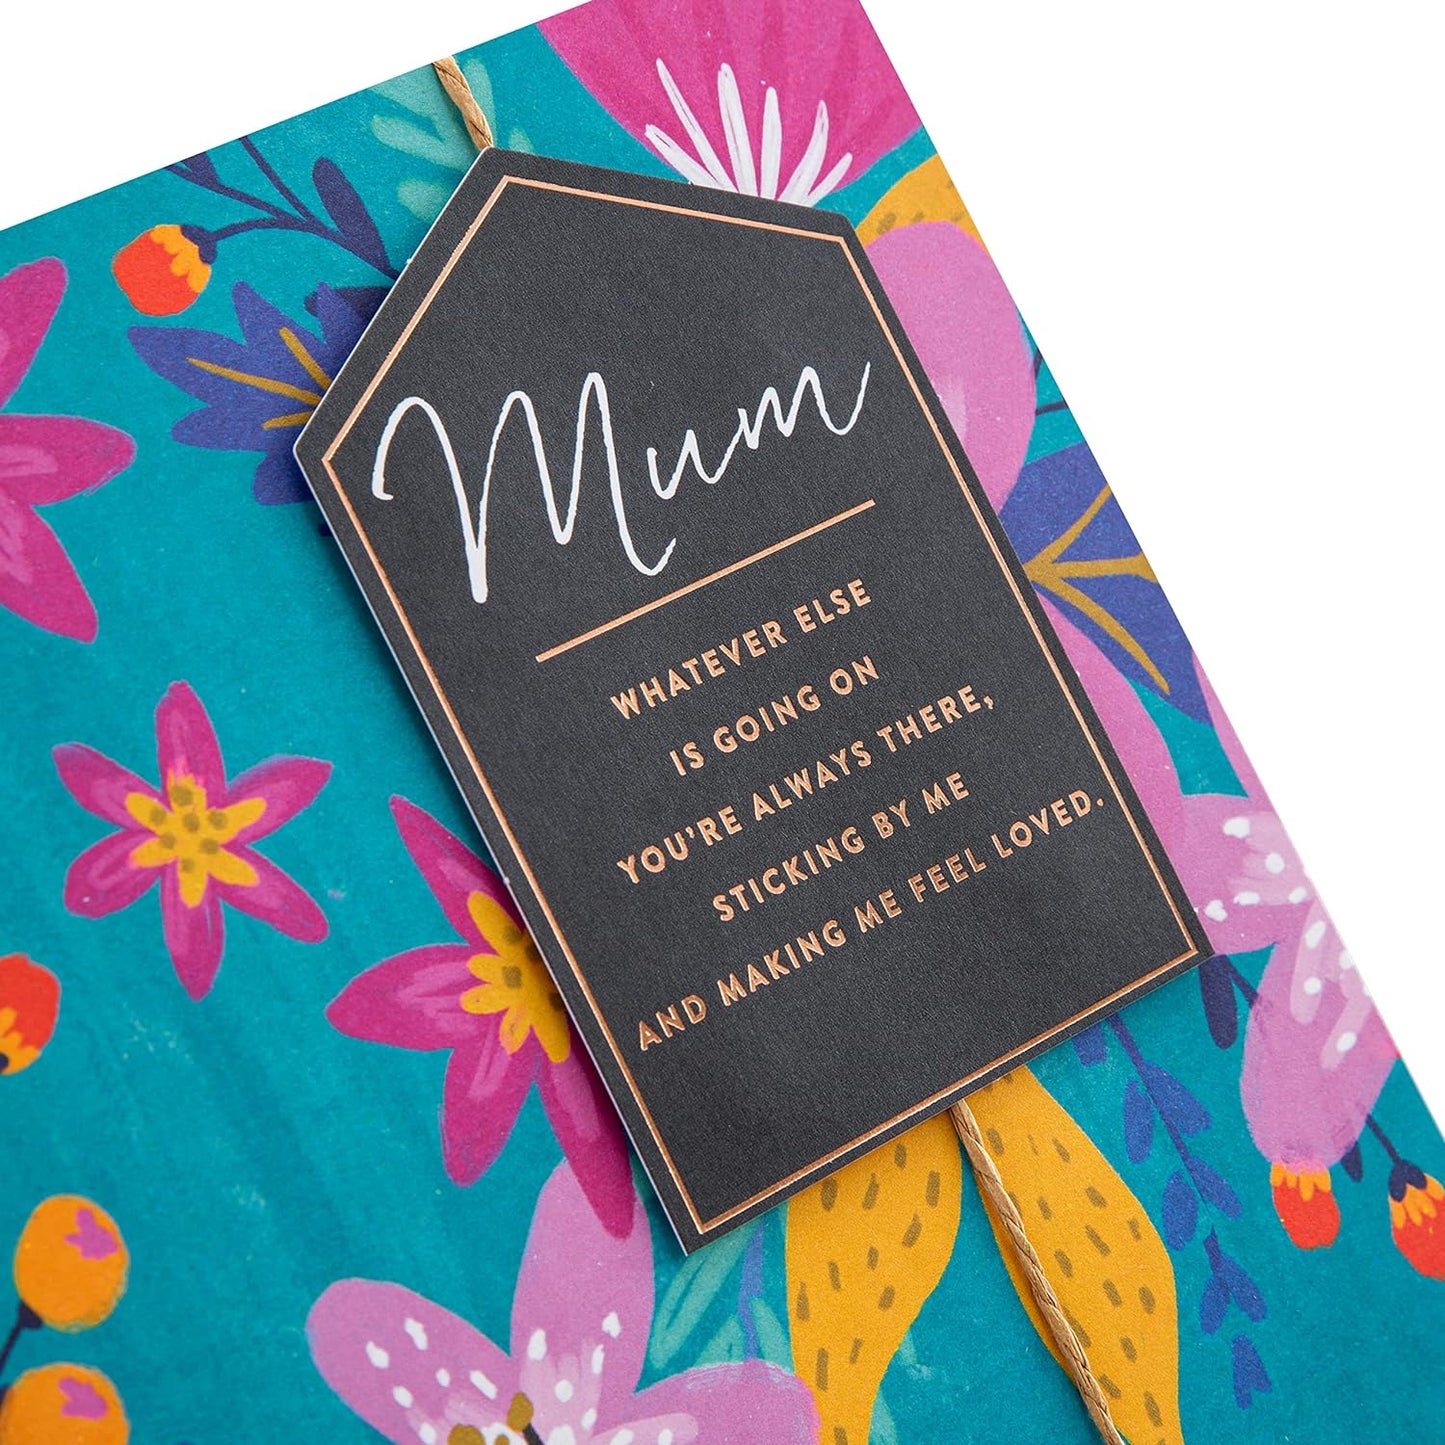 Traditional Colourful Floral Design Mum Birthday Card